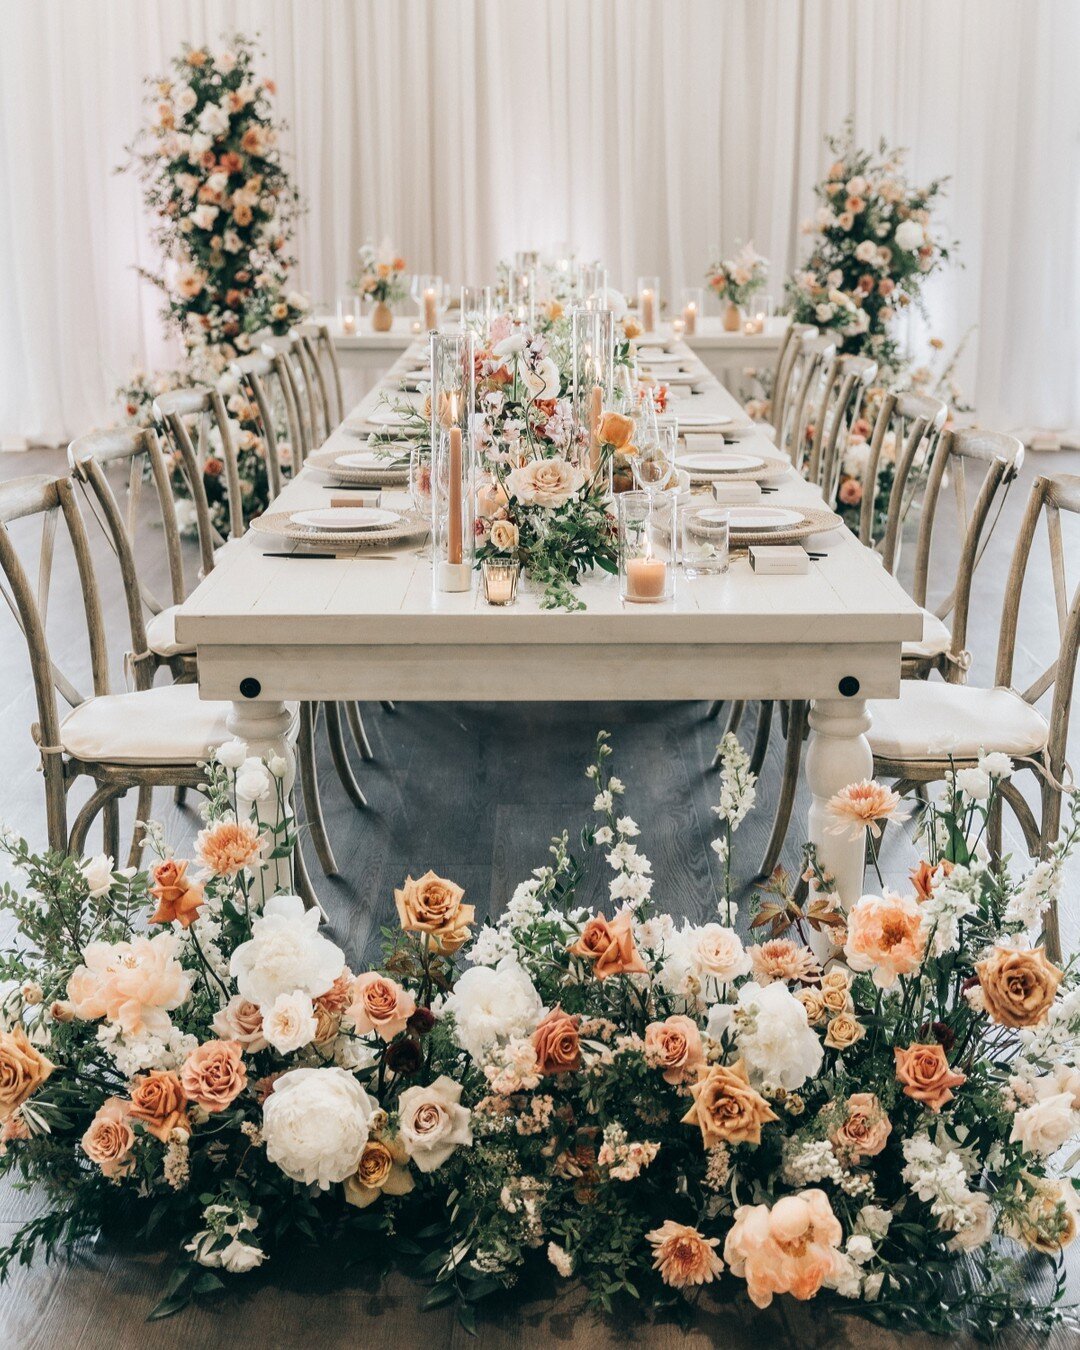 The prettiest kings head table we ever did see! ⁣
We absolutely adored collaborating with Alex of @foreverwildfield to create this warm and inviting head table design for Mallory &amp; Spencer. The florals and candle treatment, paired with those clas